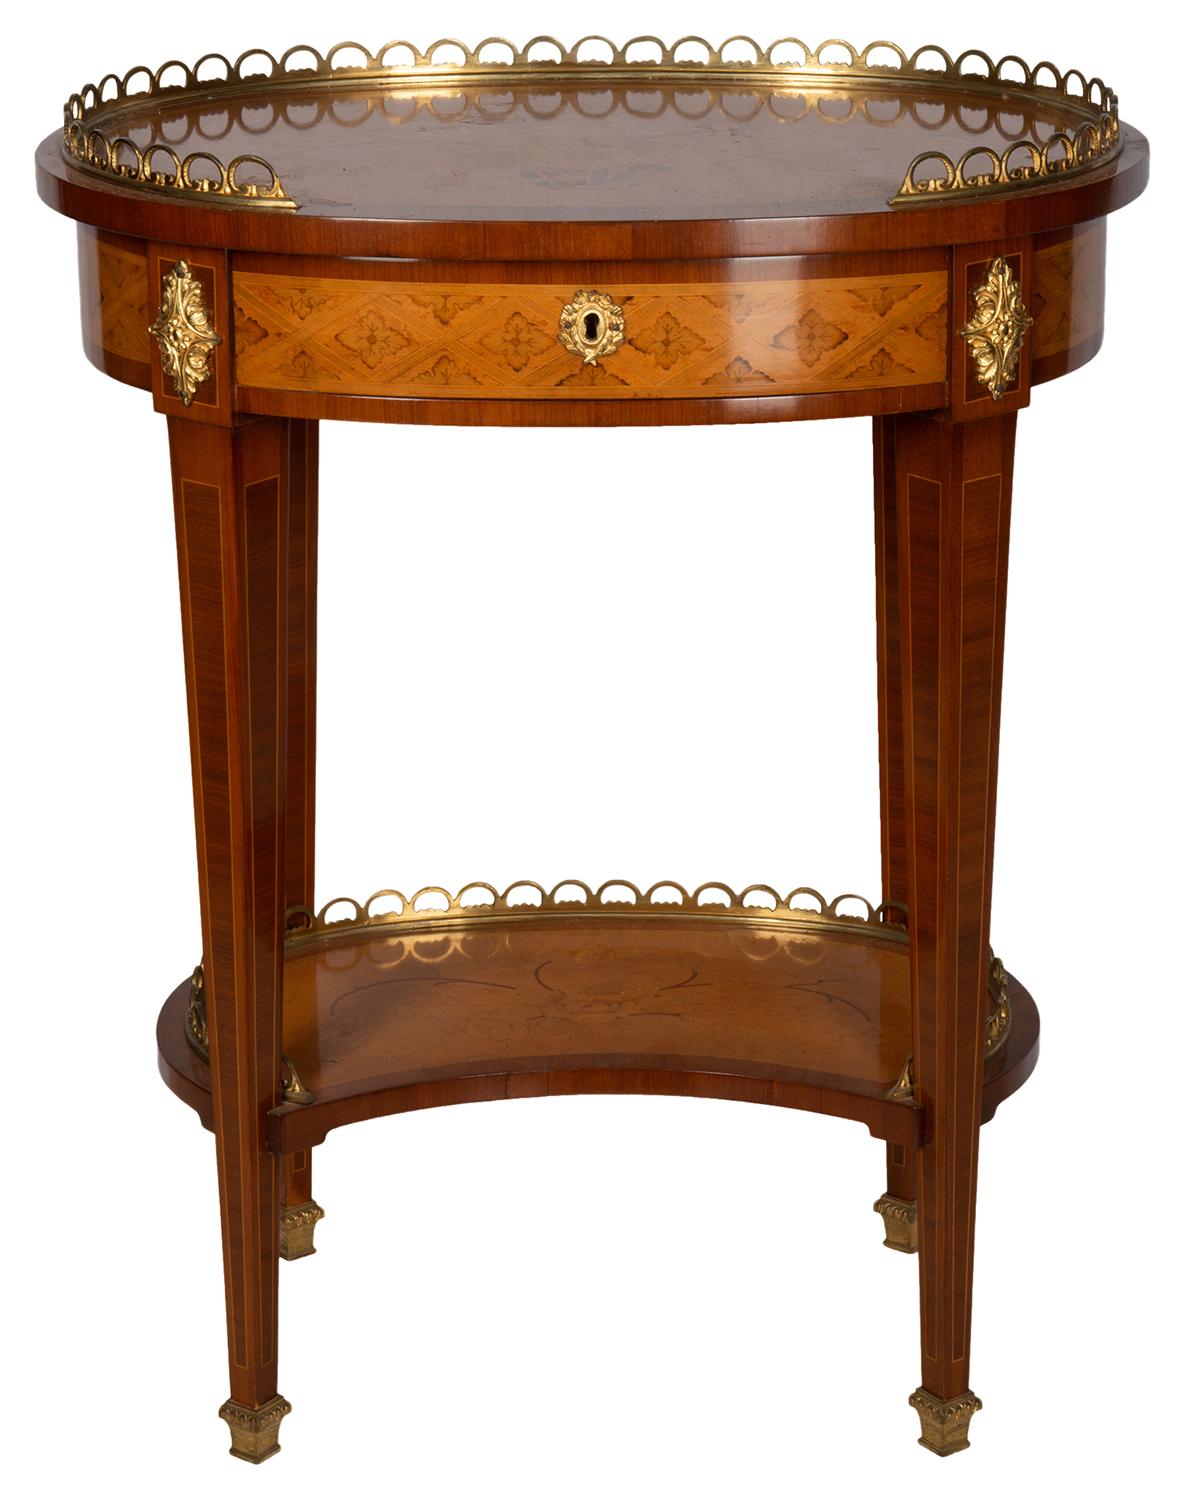 A pair of French oval inlaid Louis XVI style side tables, each with an ormolu three quarter gallery to the tops, inlaid floral decoration the top and under tier. Having single frieze drawers also with inlaid, raised on square tapering legs and